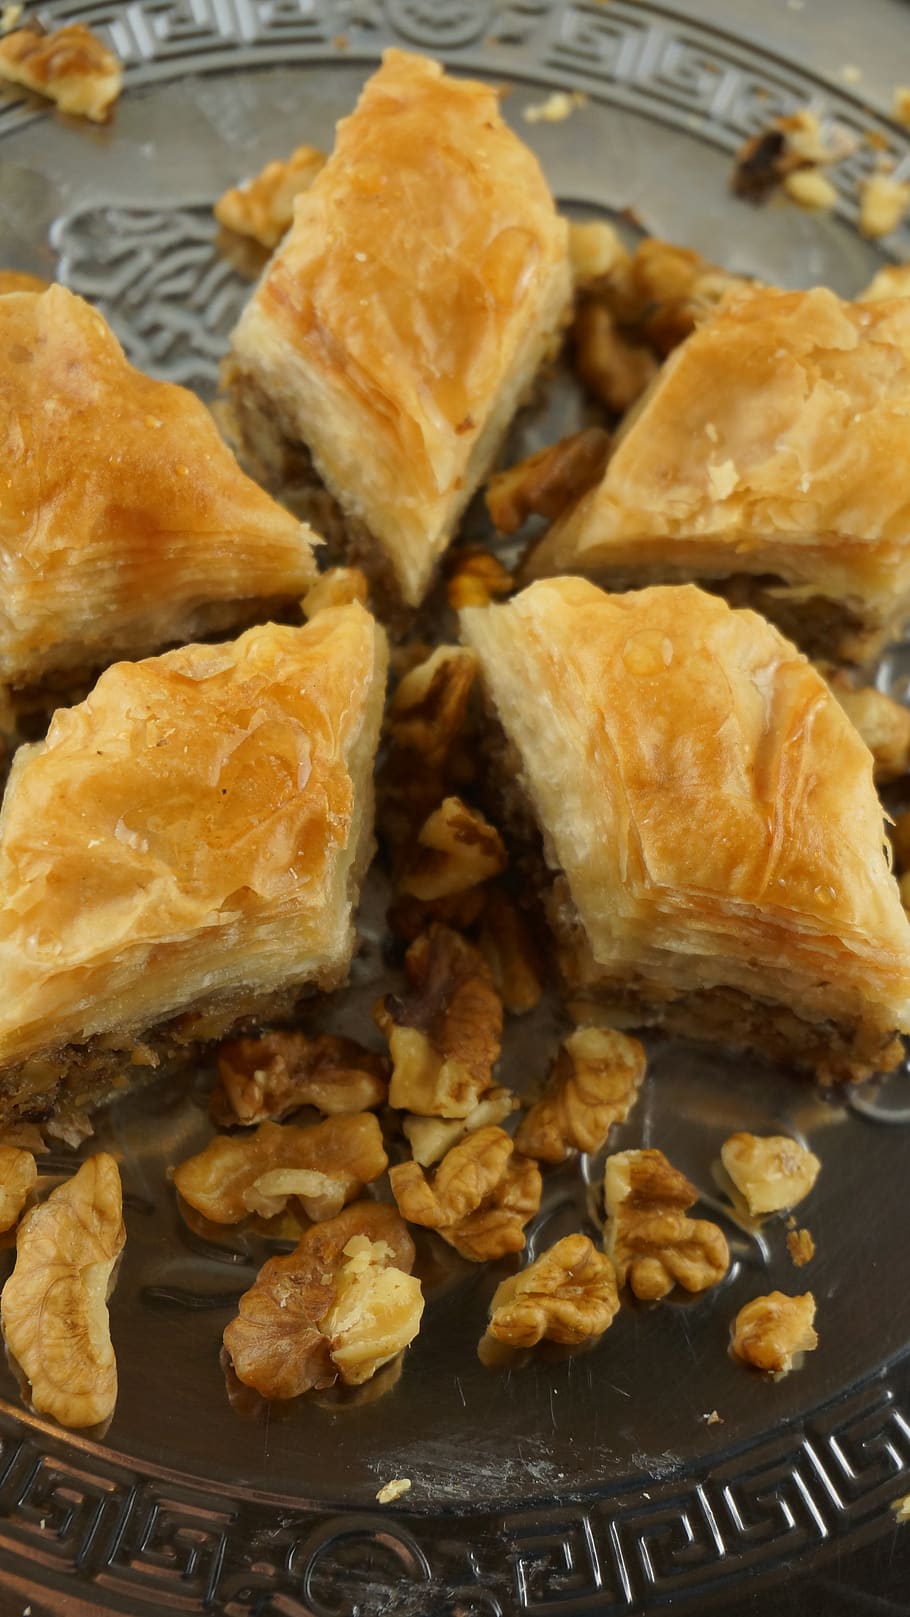 baklava with walnut, oriental kitchen, sweet pastries, food and drink, food, ready-to-eat, still life, freshness, plate, indoors